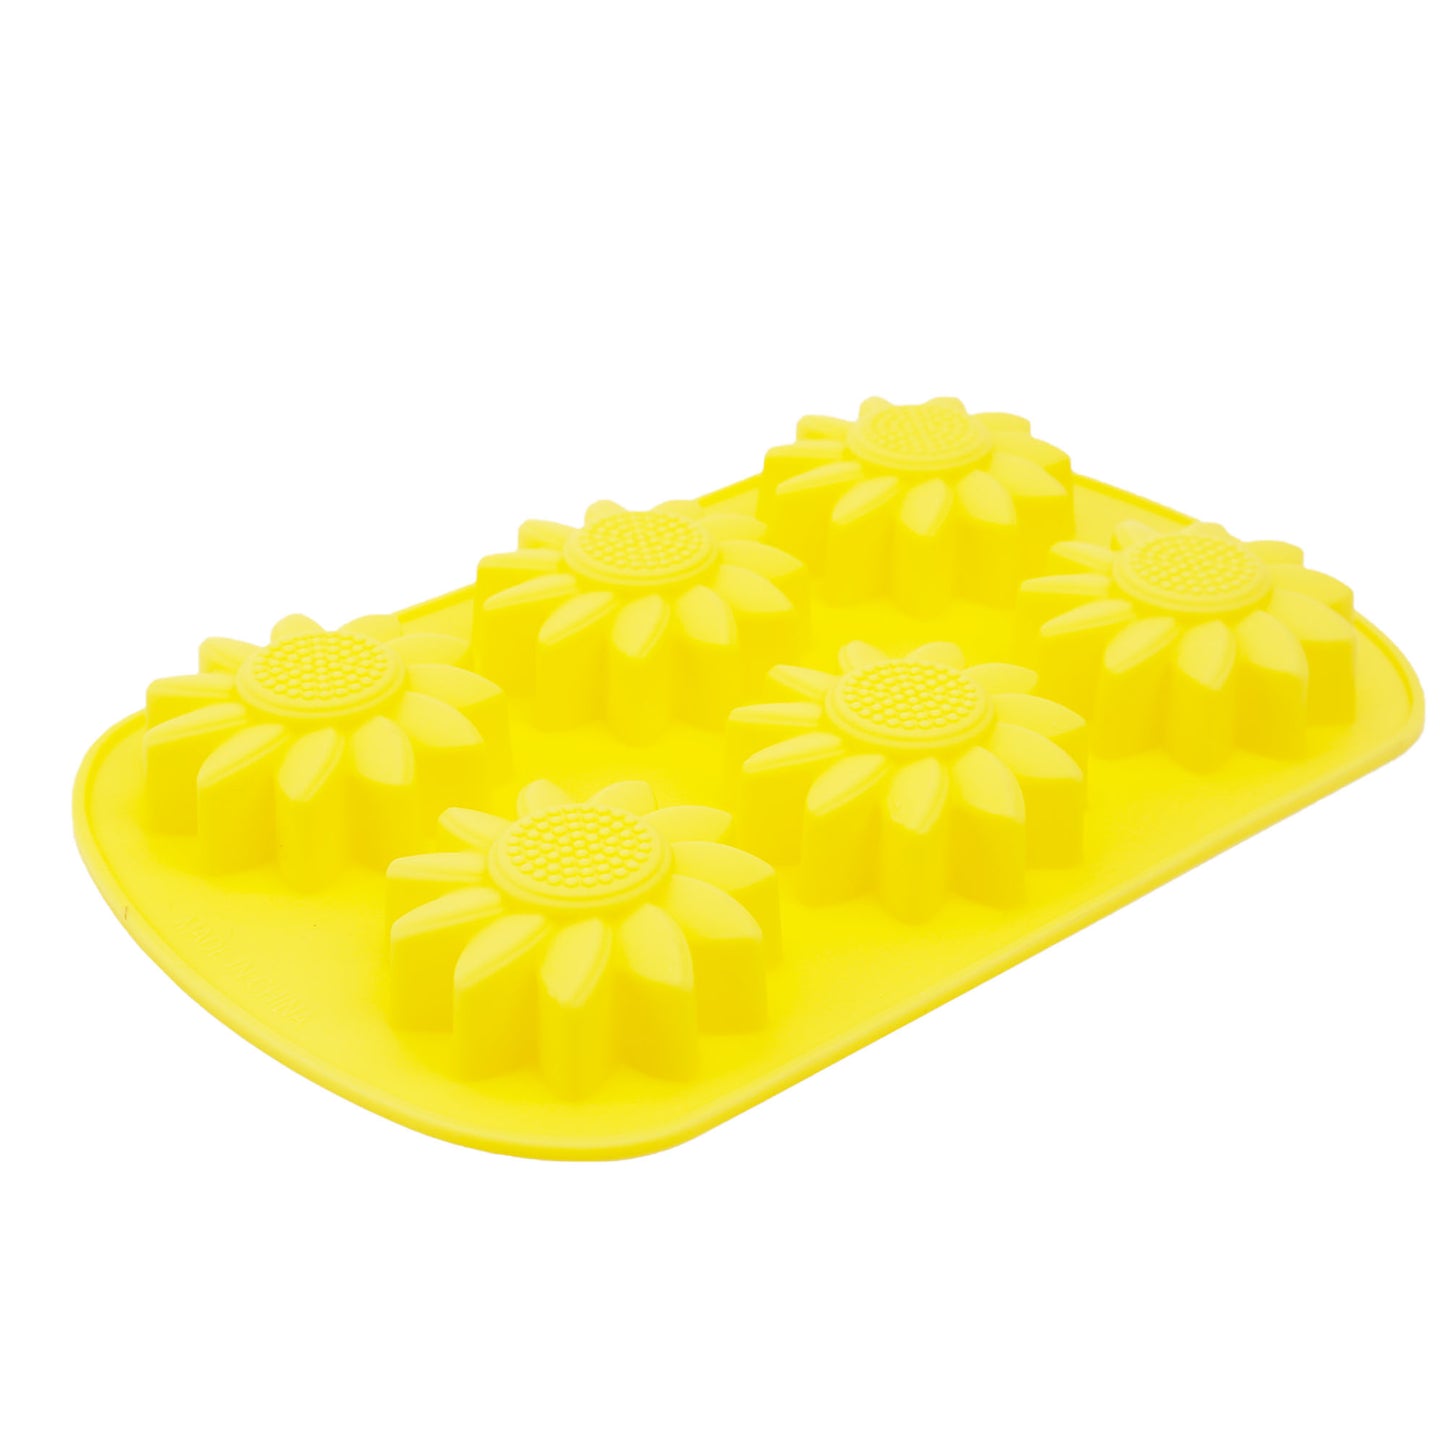 Cheep N Cheerful 12 Pc Easter Silicone Mold and Cookie Cutter Deluxe Set, Easter Baking Supplies